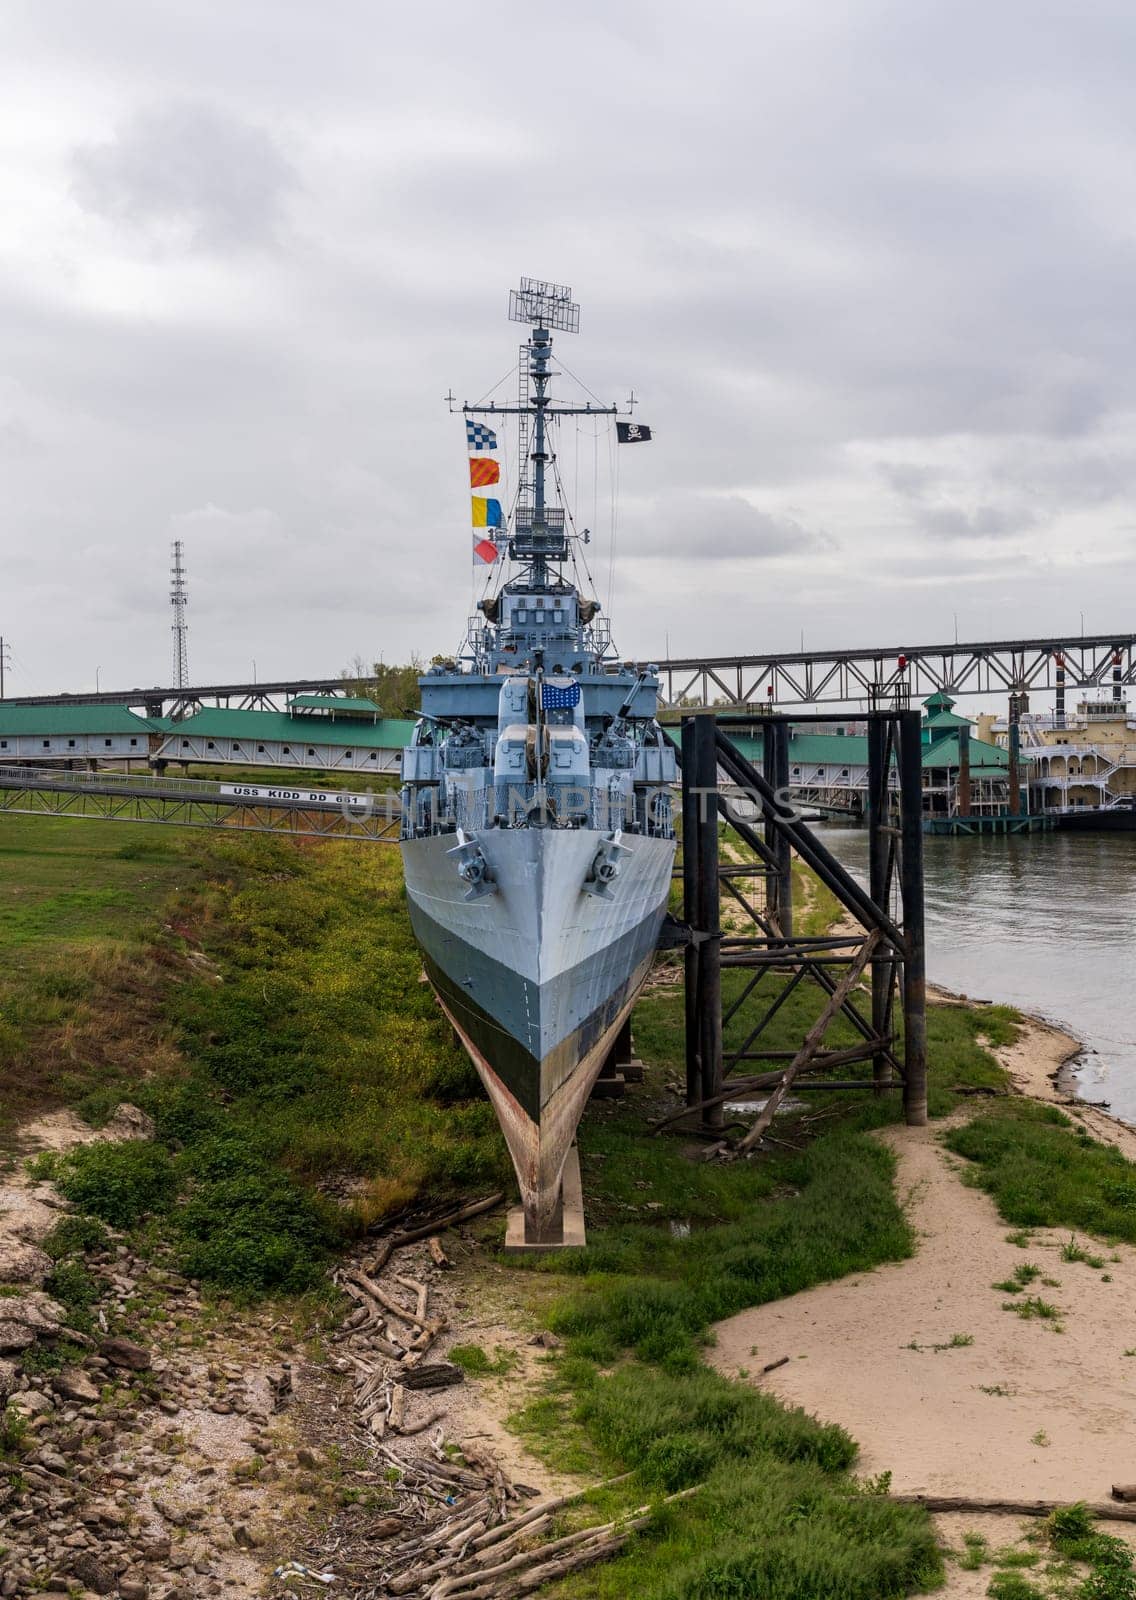 USS Kidd in low water by the Mississippi river in Baton Rouge, LA by steheap